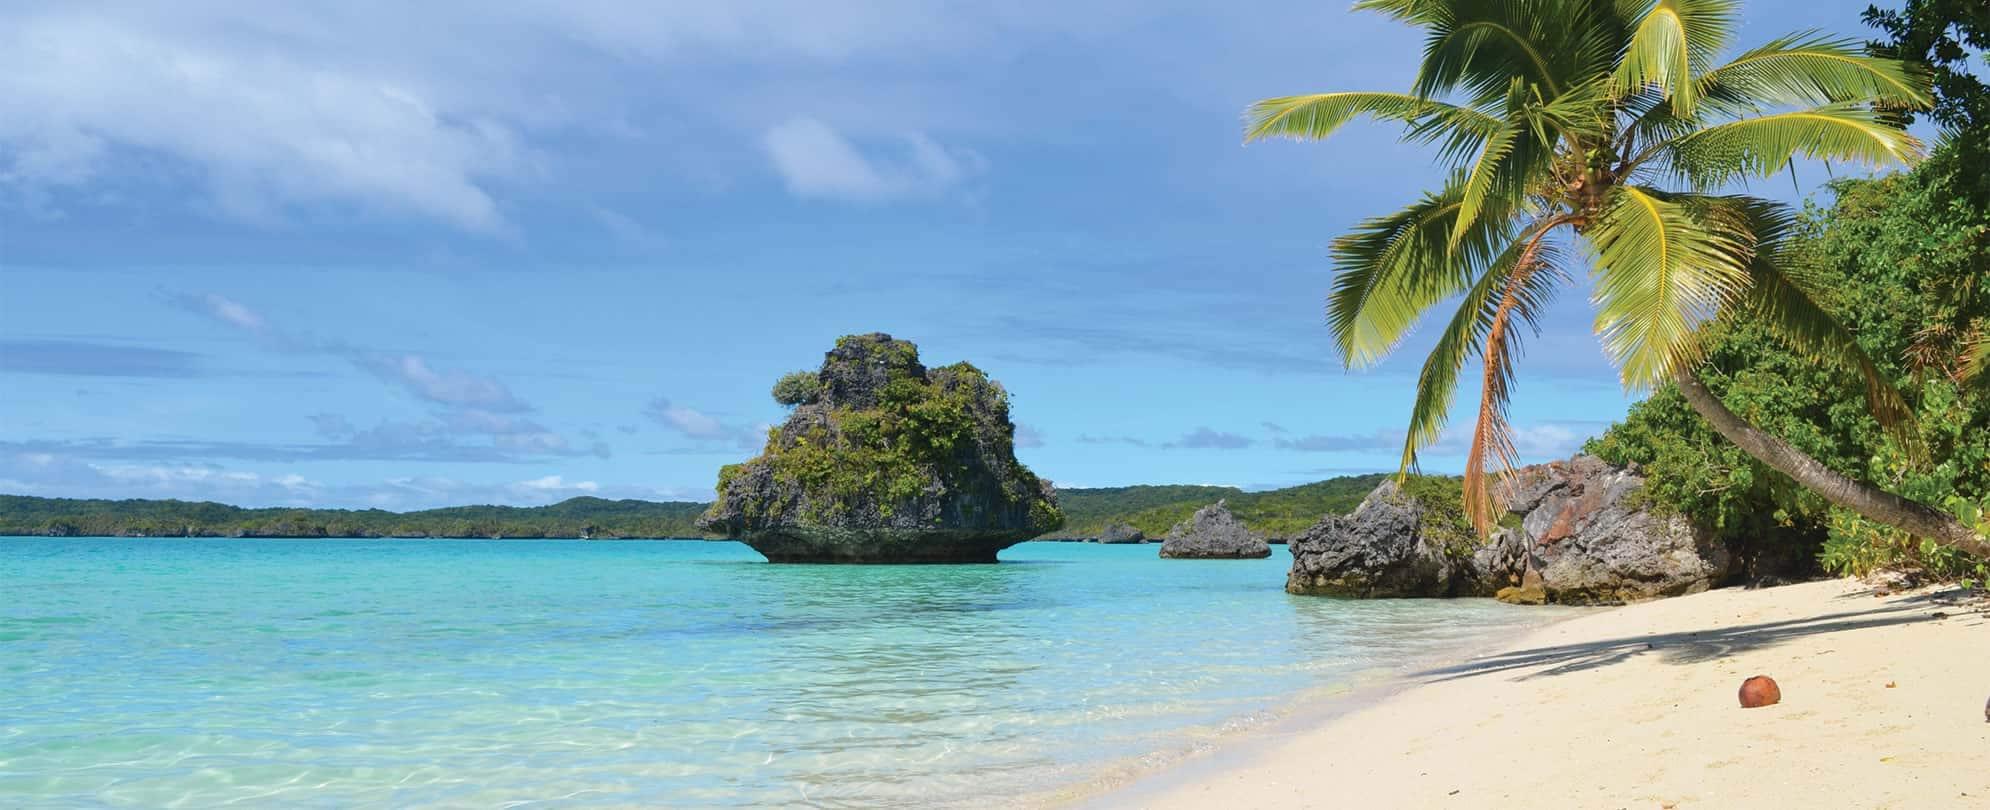 A tropical beach with turquoise water, rock formations, and palm trees.